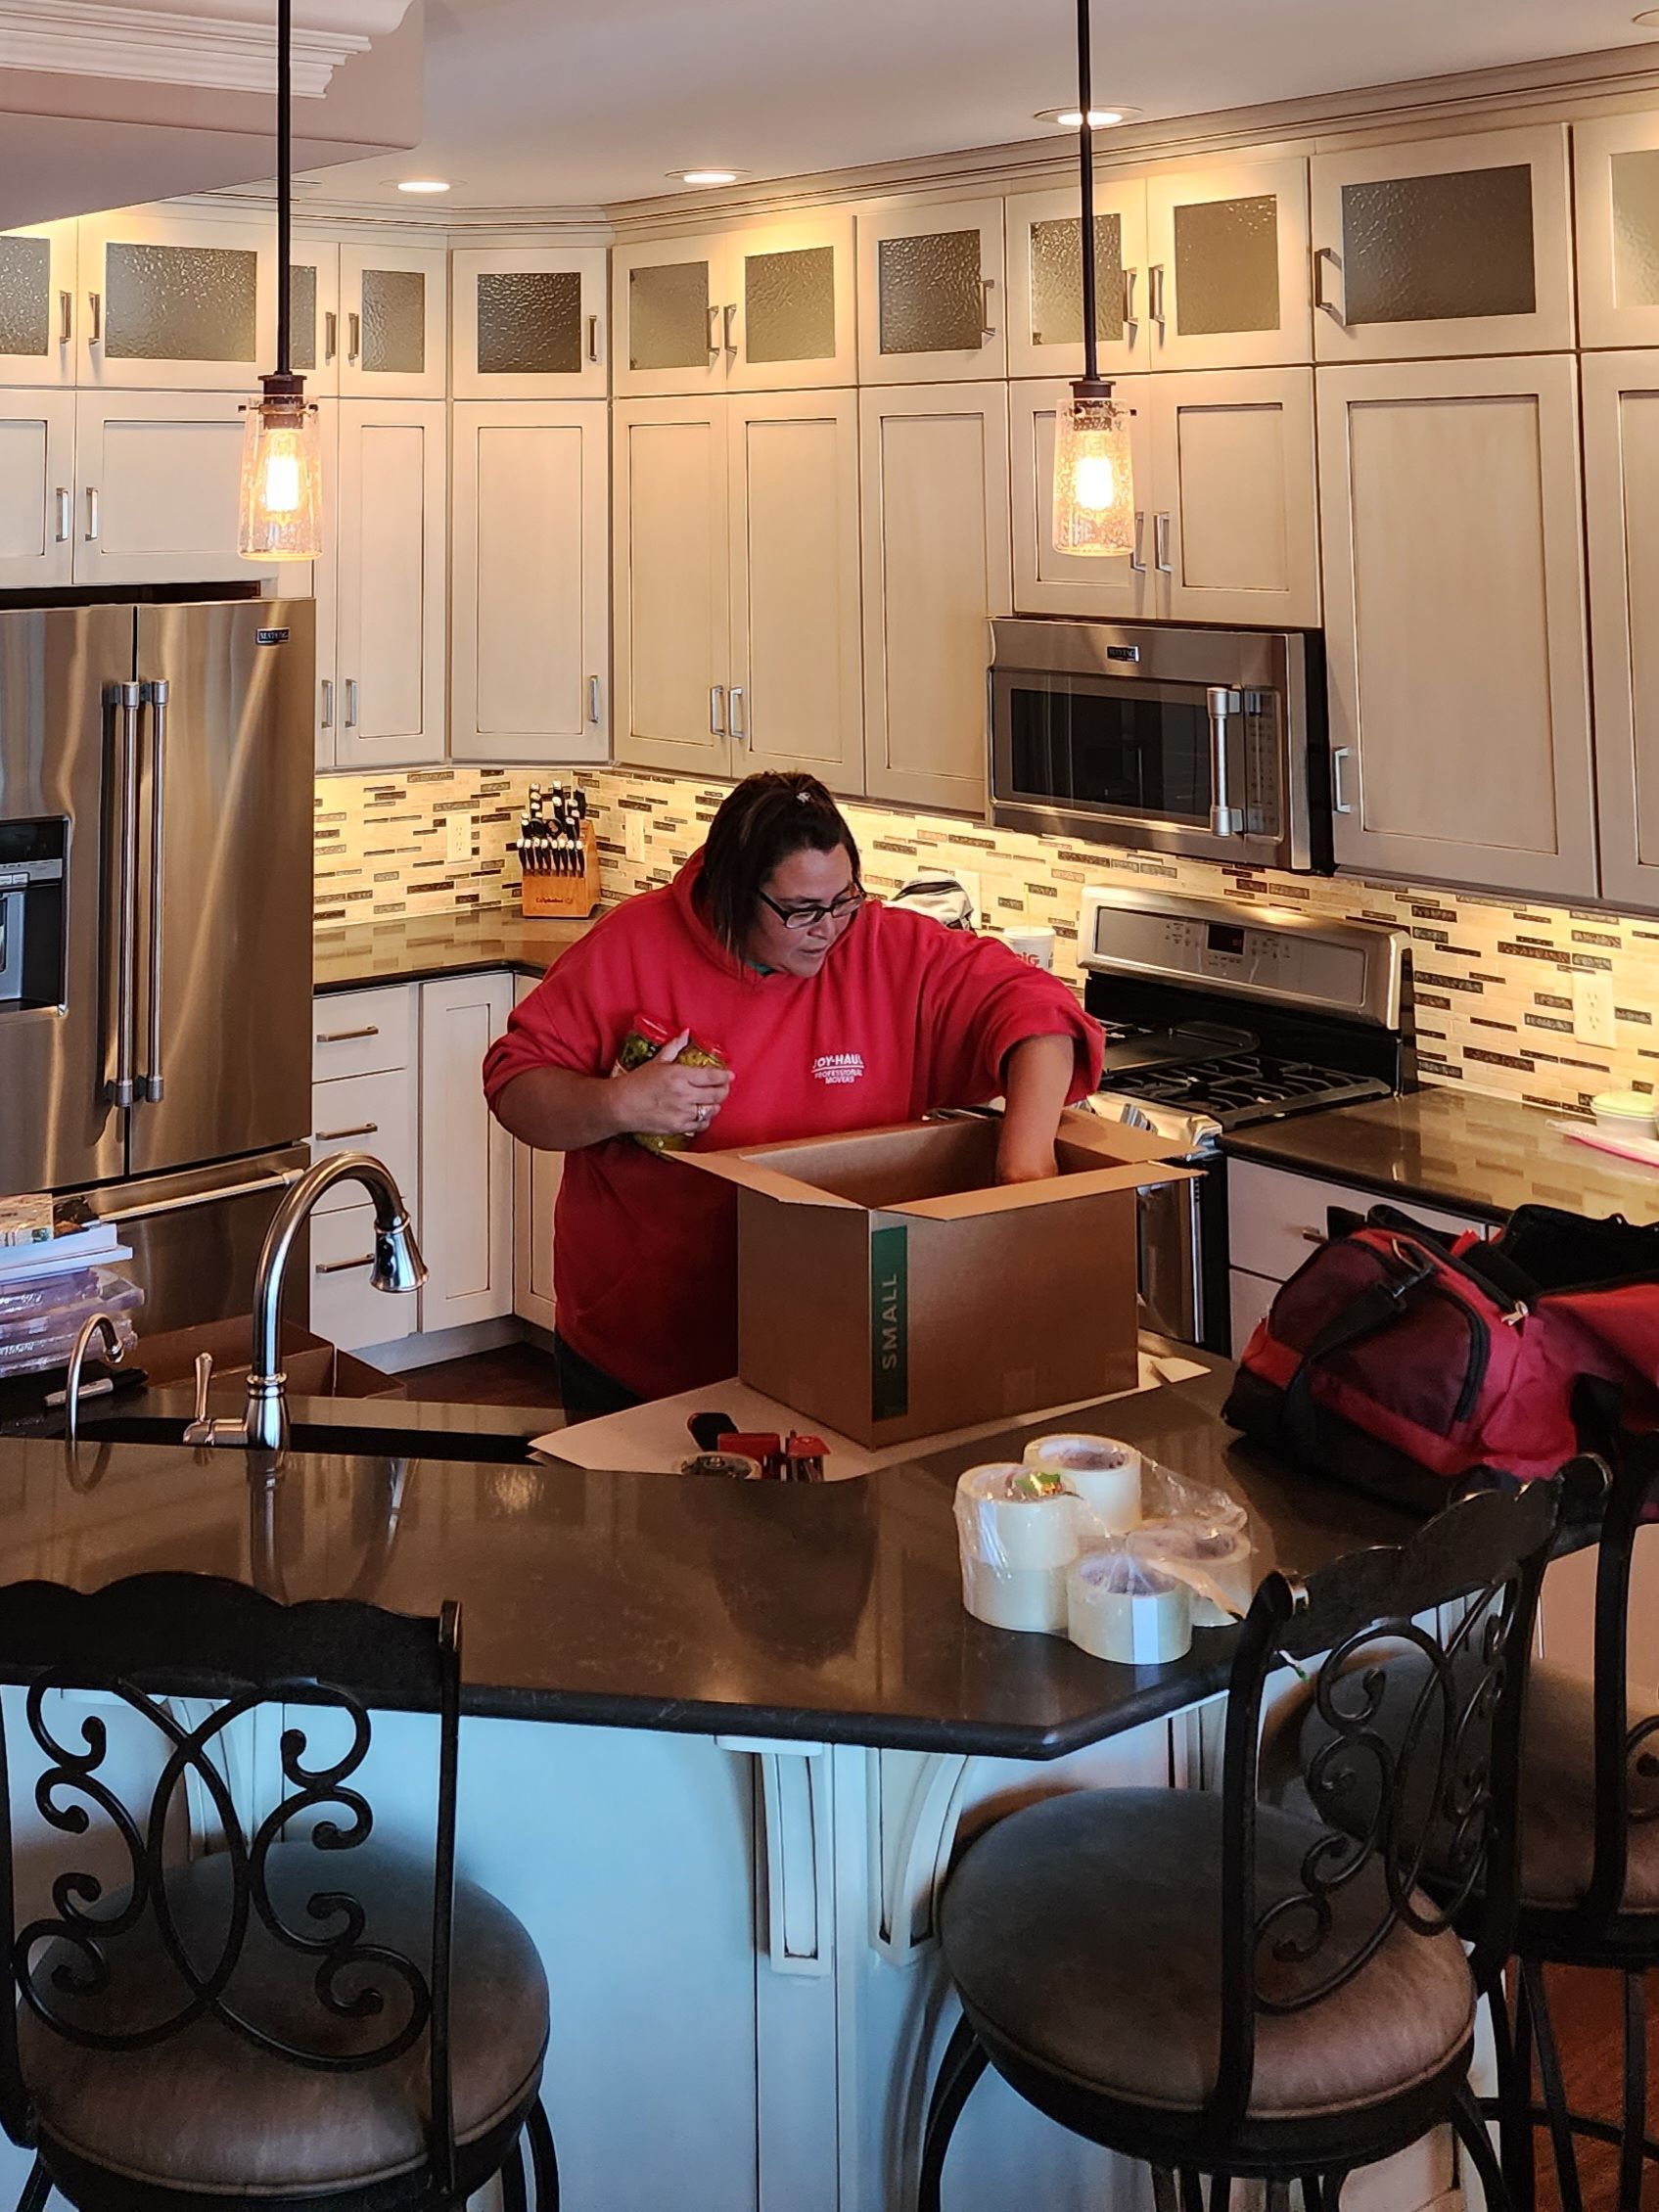 a woman in a red shirt is standing in a kitchen packing a box .